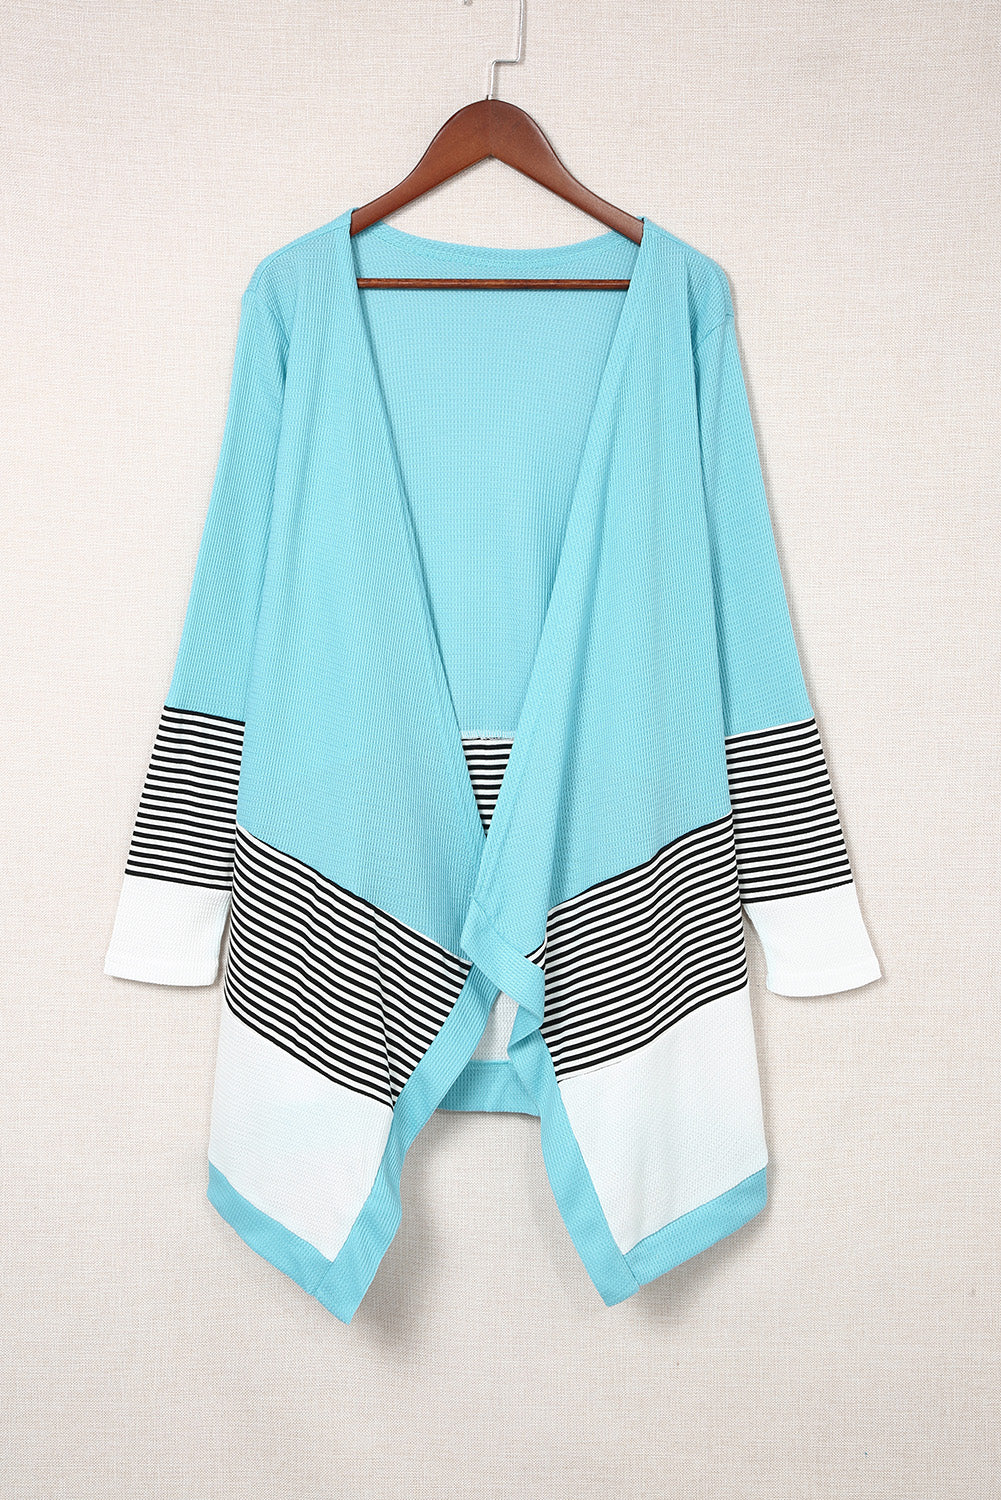 Striped Color Block Open Front Cardigan - Women’s Clothing & Accessories - Shirts & Tops - 5 - 2024